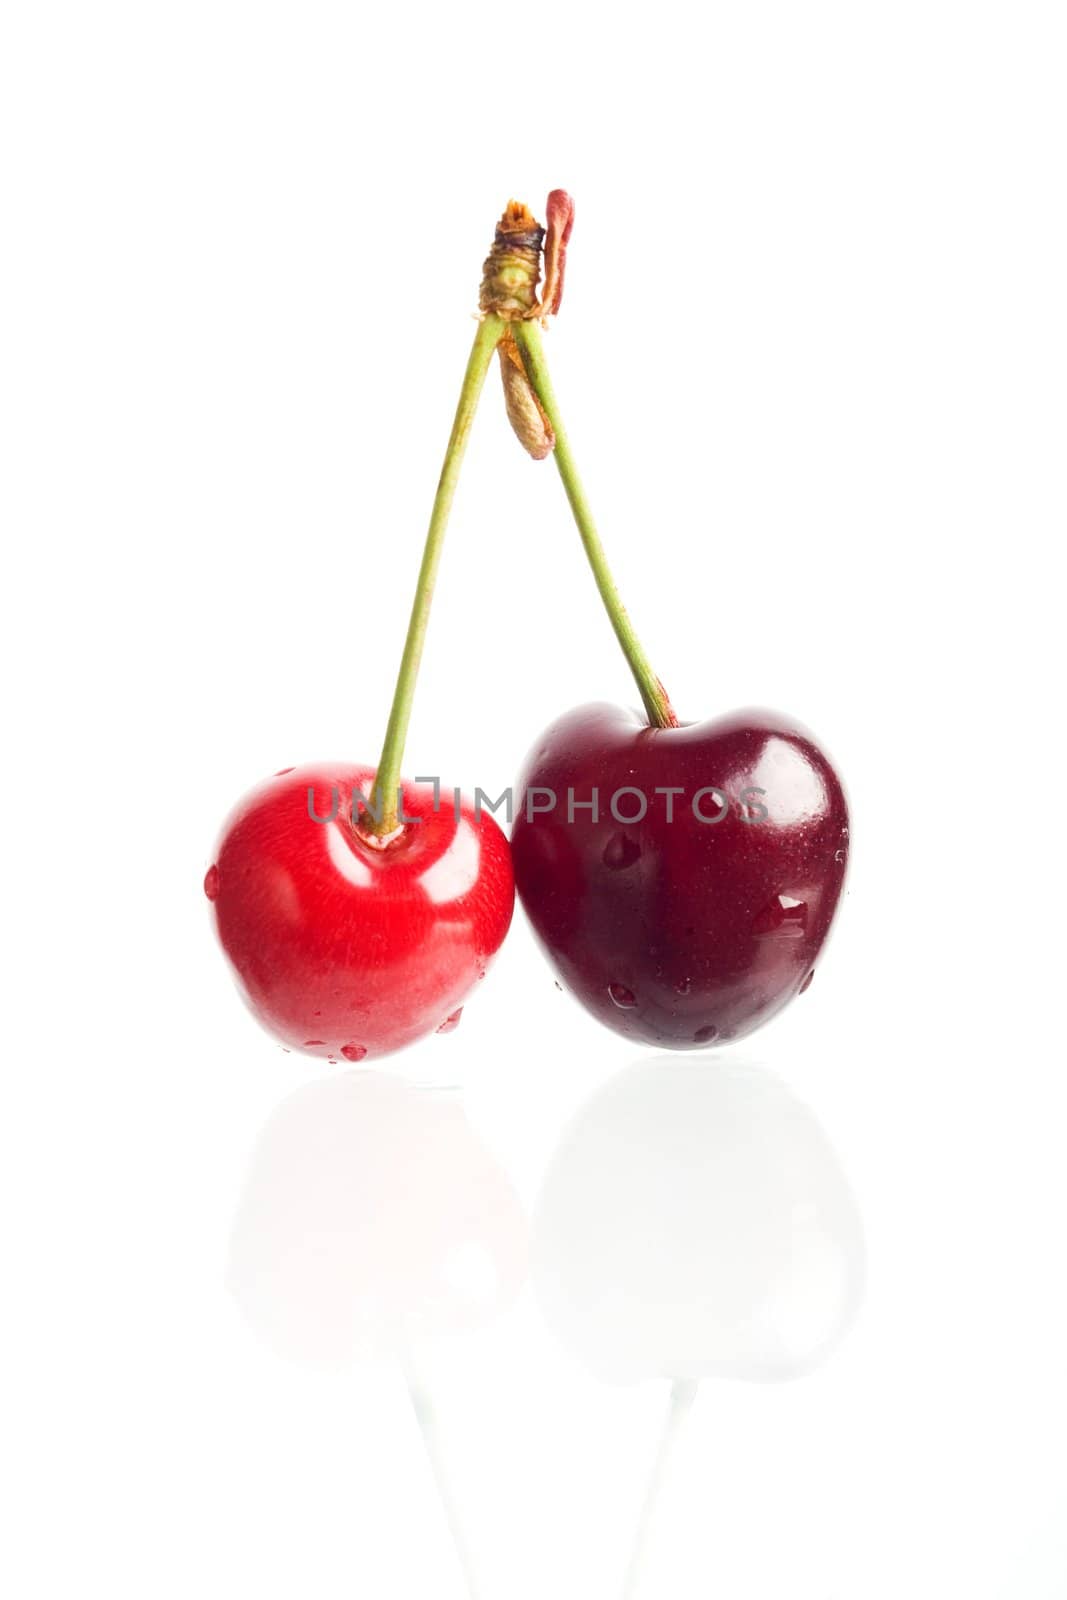 An image of cherries on white background